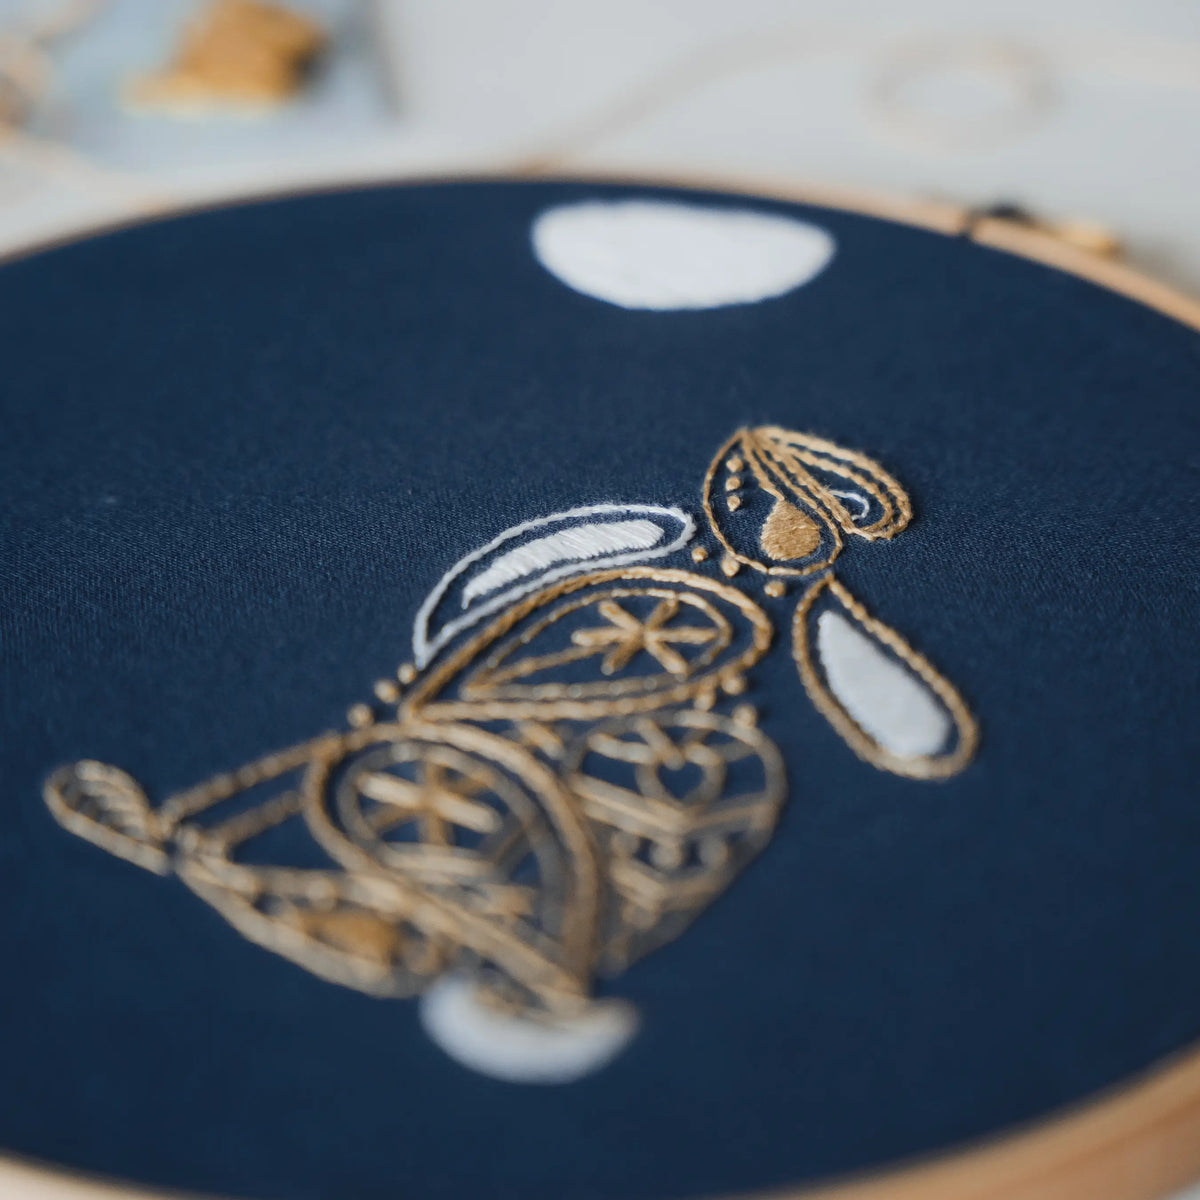 Moon Gazing Hare Hand Embroidery Kit